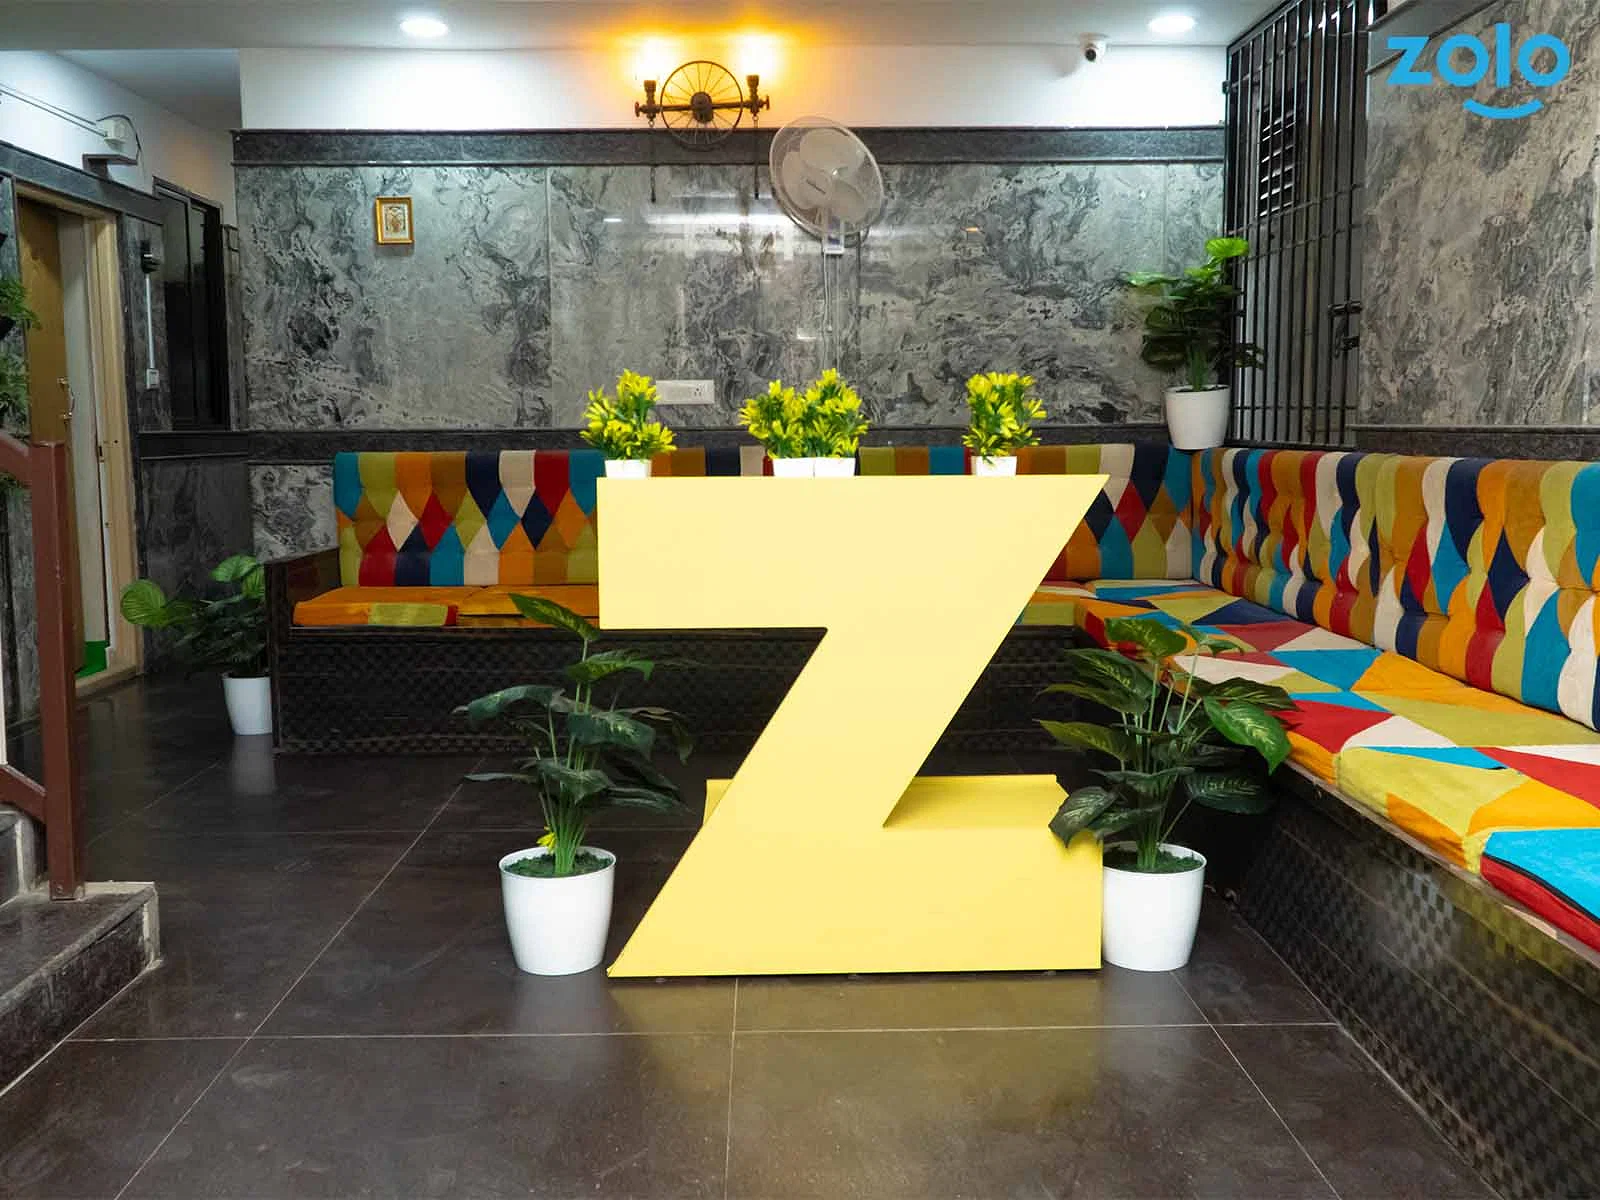 budget-friendly PGs and hostels for men and women with single rooms with daily hopusekeeping-Zolo Highstreet E